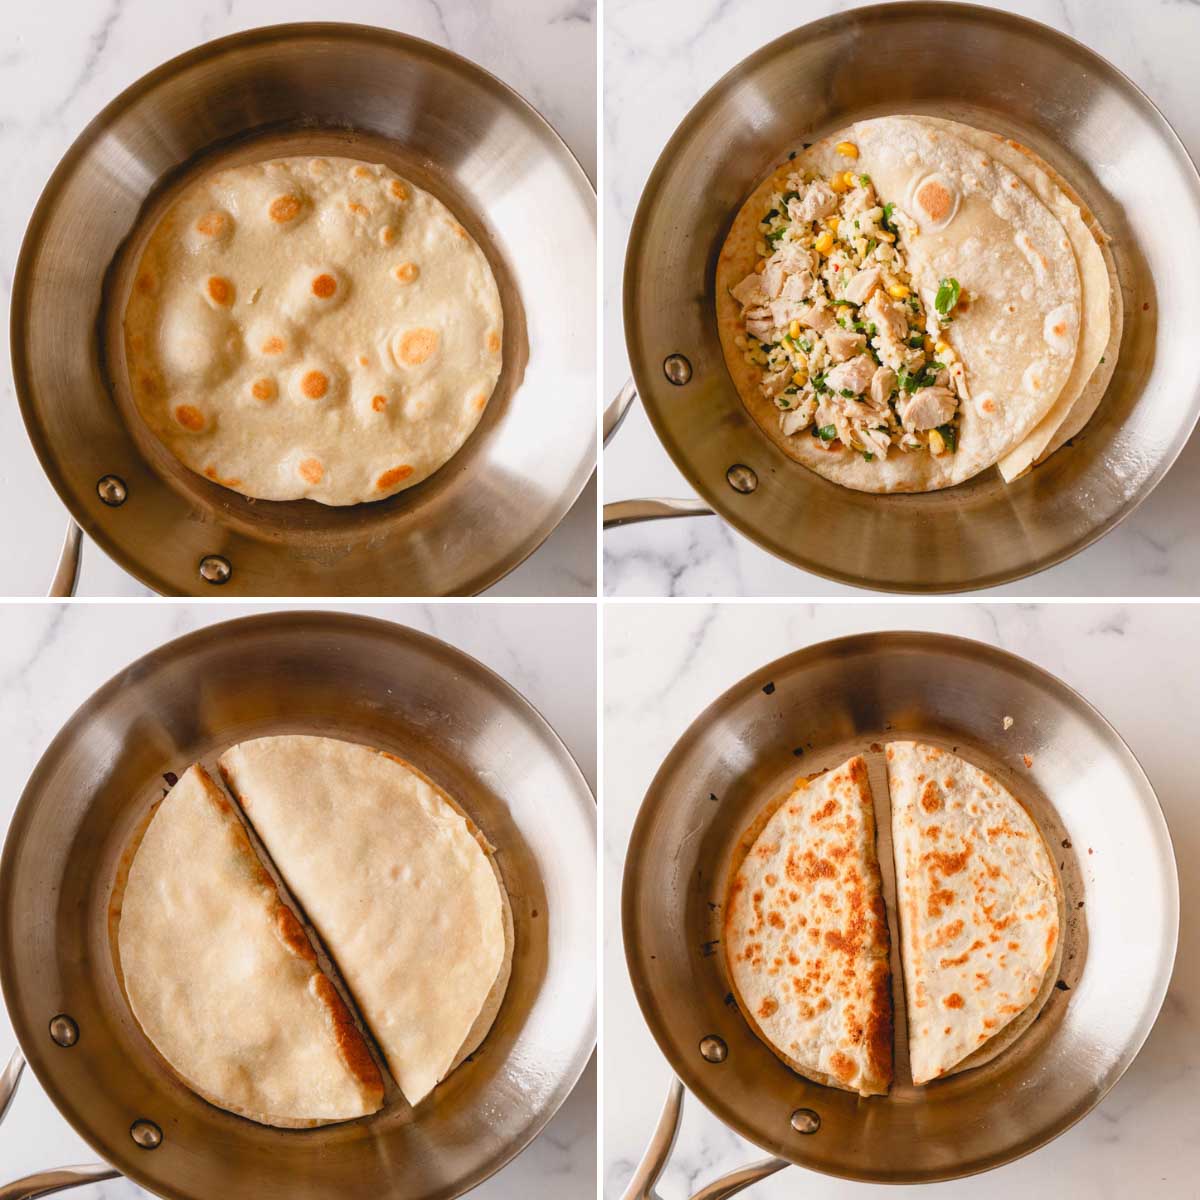 Four images showing the process of making a chicken quesadilla in a skillet.